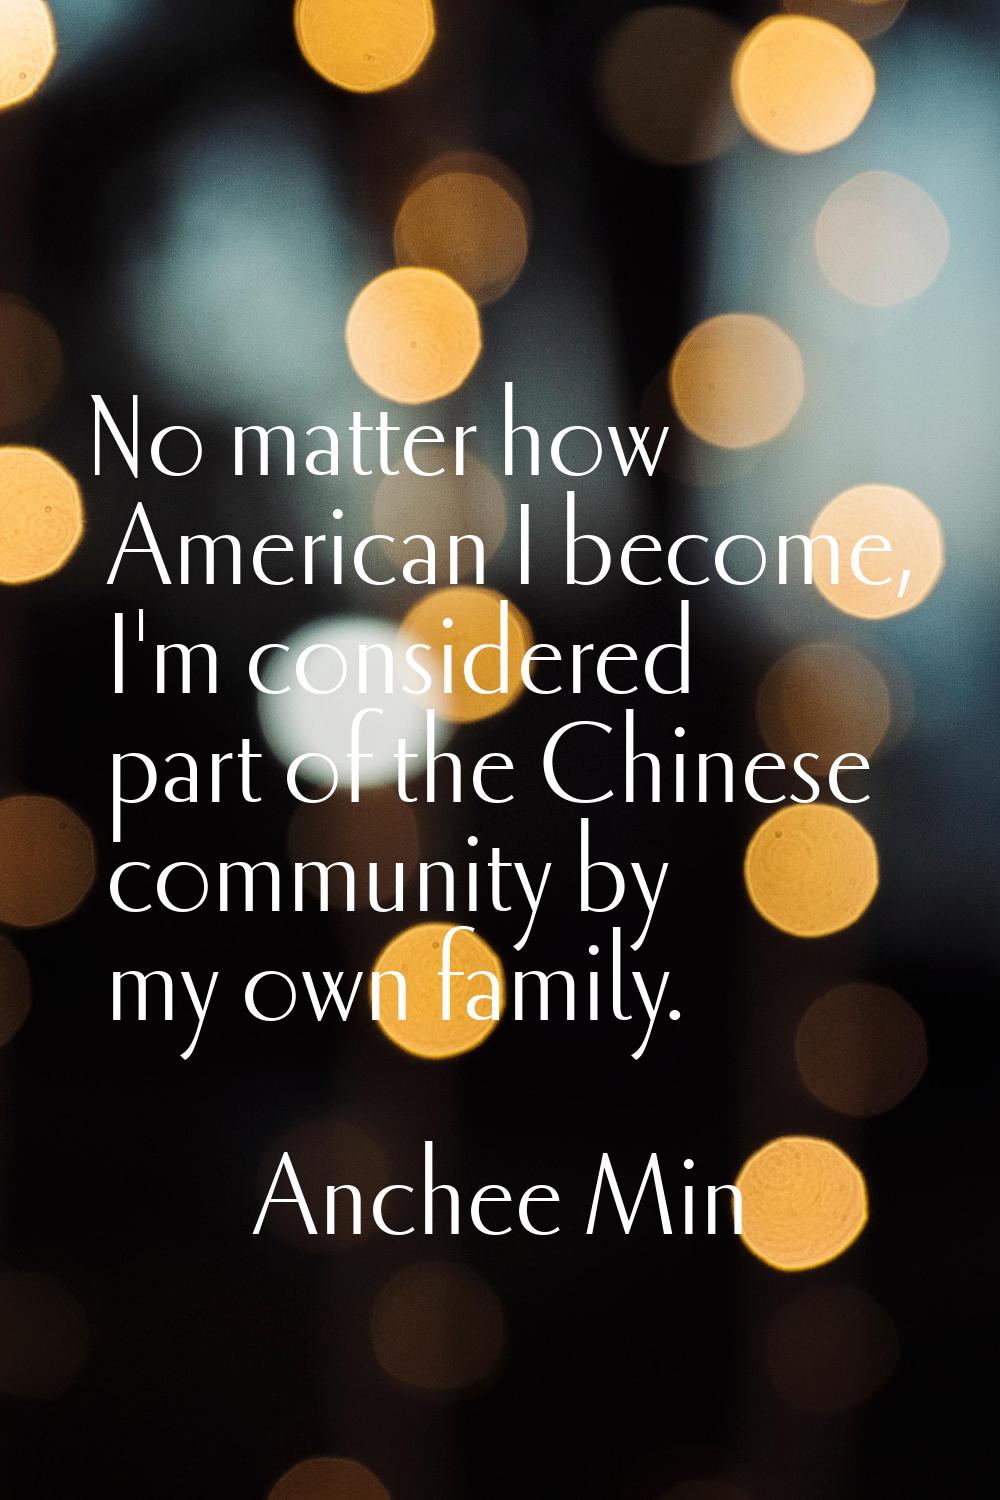 No matter how American I become, I'm considered part of the Chinese community by my own family.